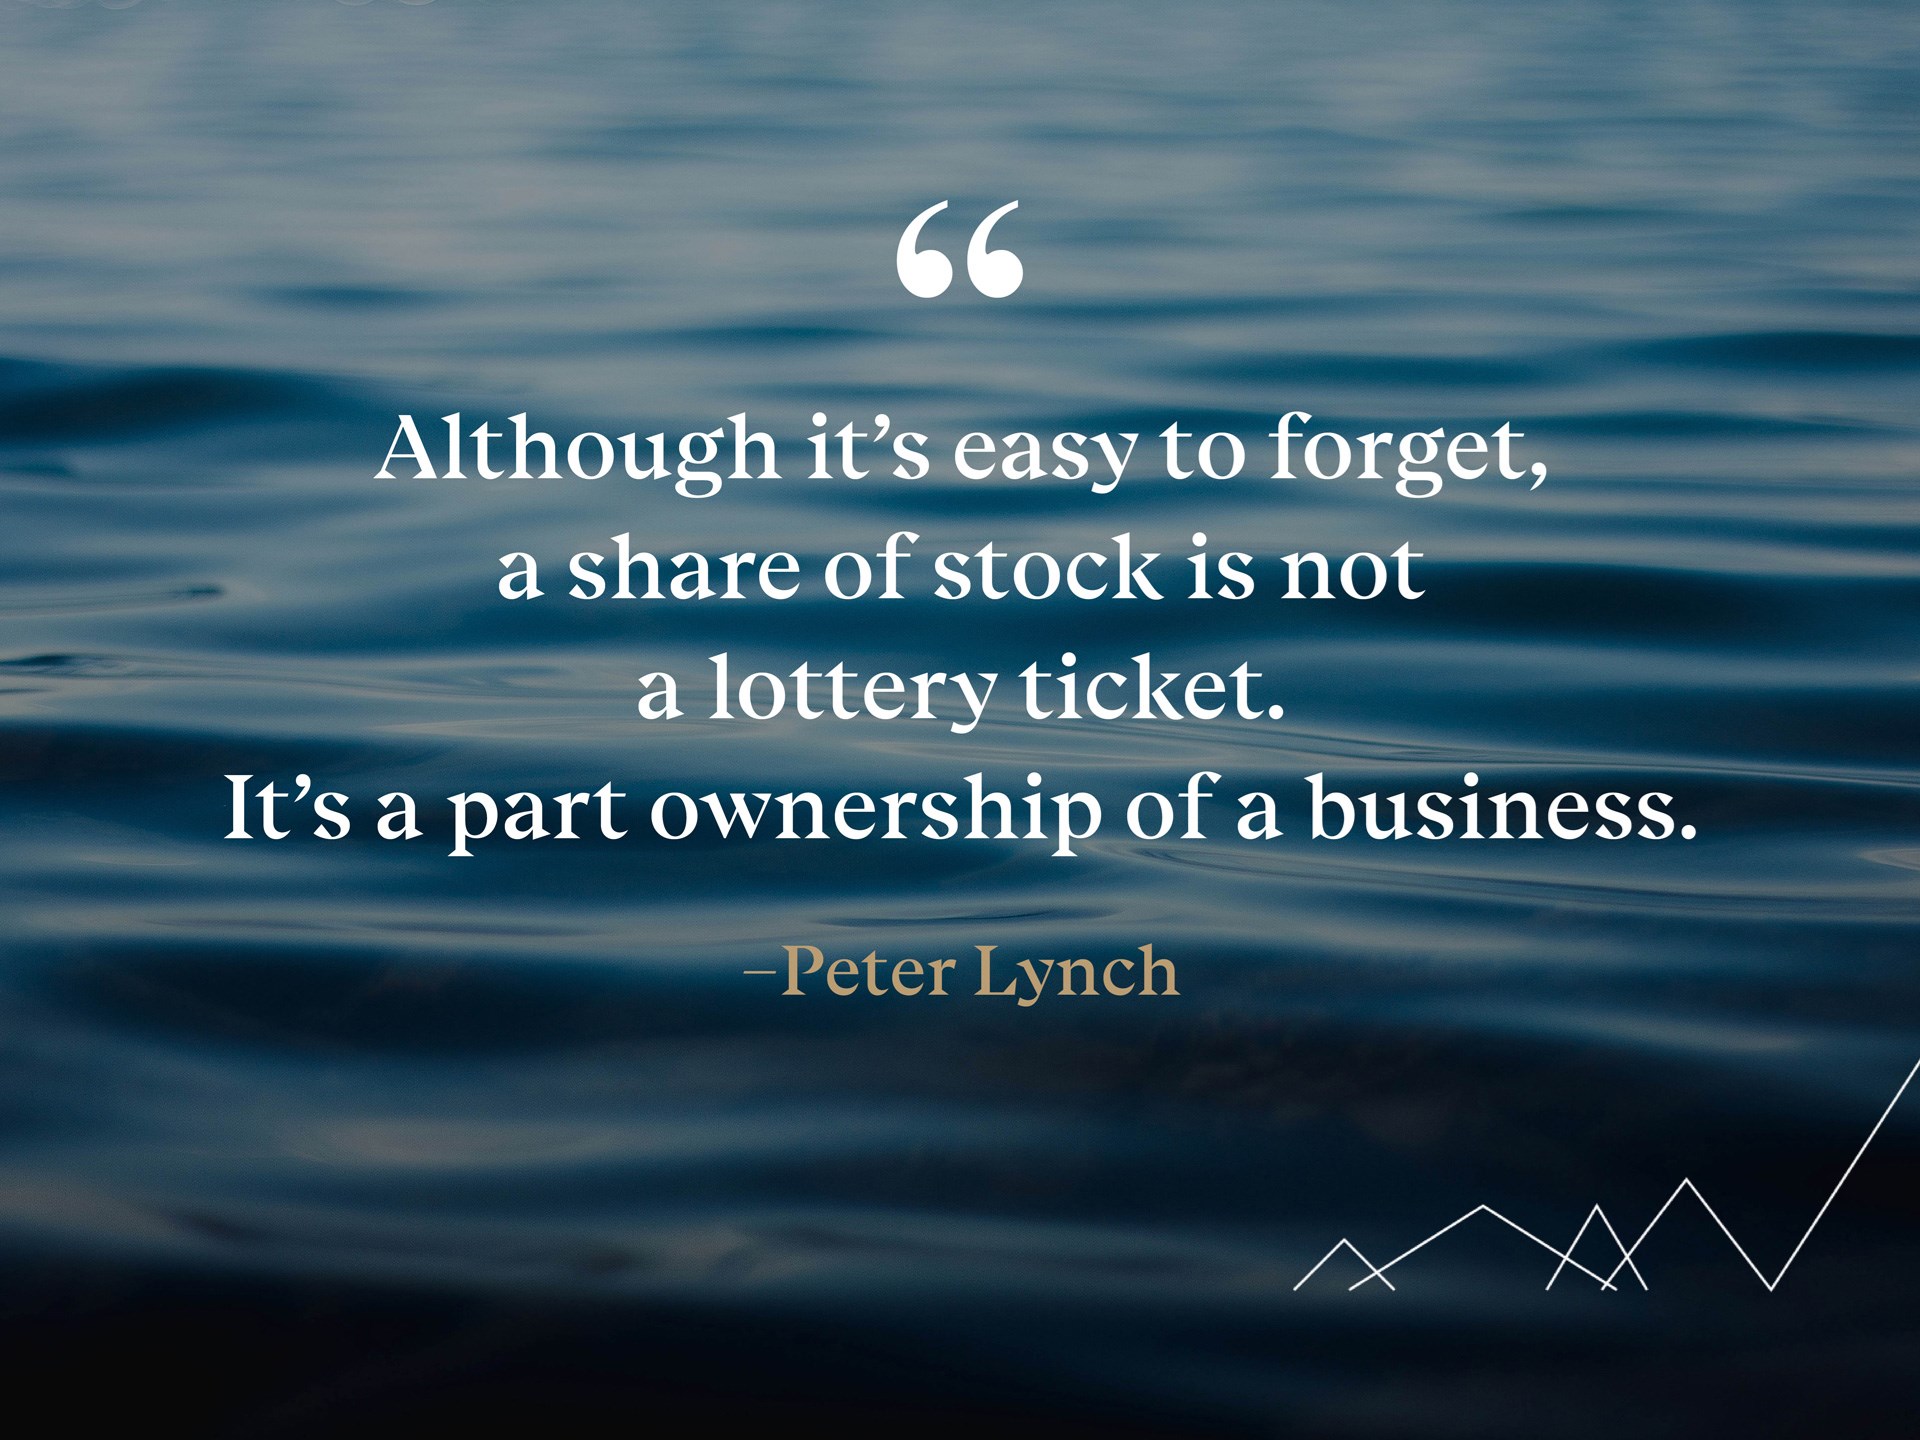 Quote: «Although it’s easy to forget, a share of stock is not a lottery ticket. It’s a part ownership of a business.» -Peter Lynch